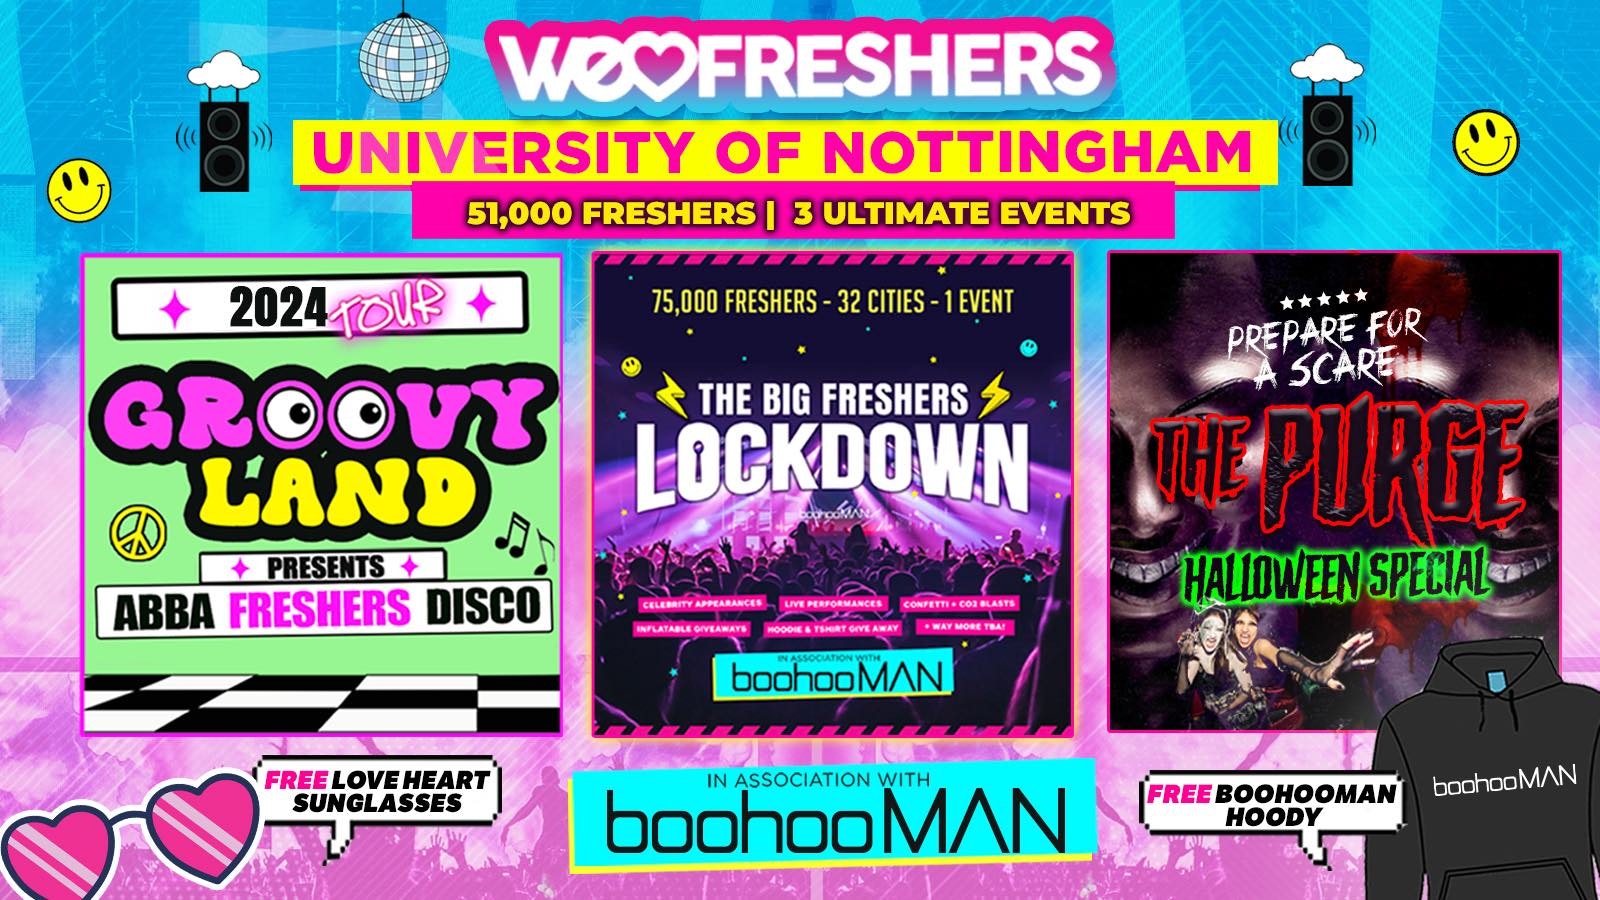 WE LOVE NOTTINGHAM UON FRESHERS 2024 in association with boohooMAN – 3 EVENTS❗